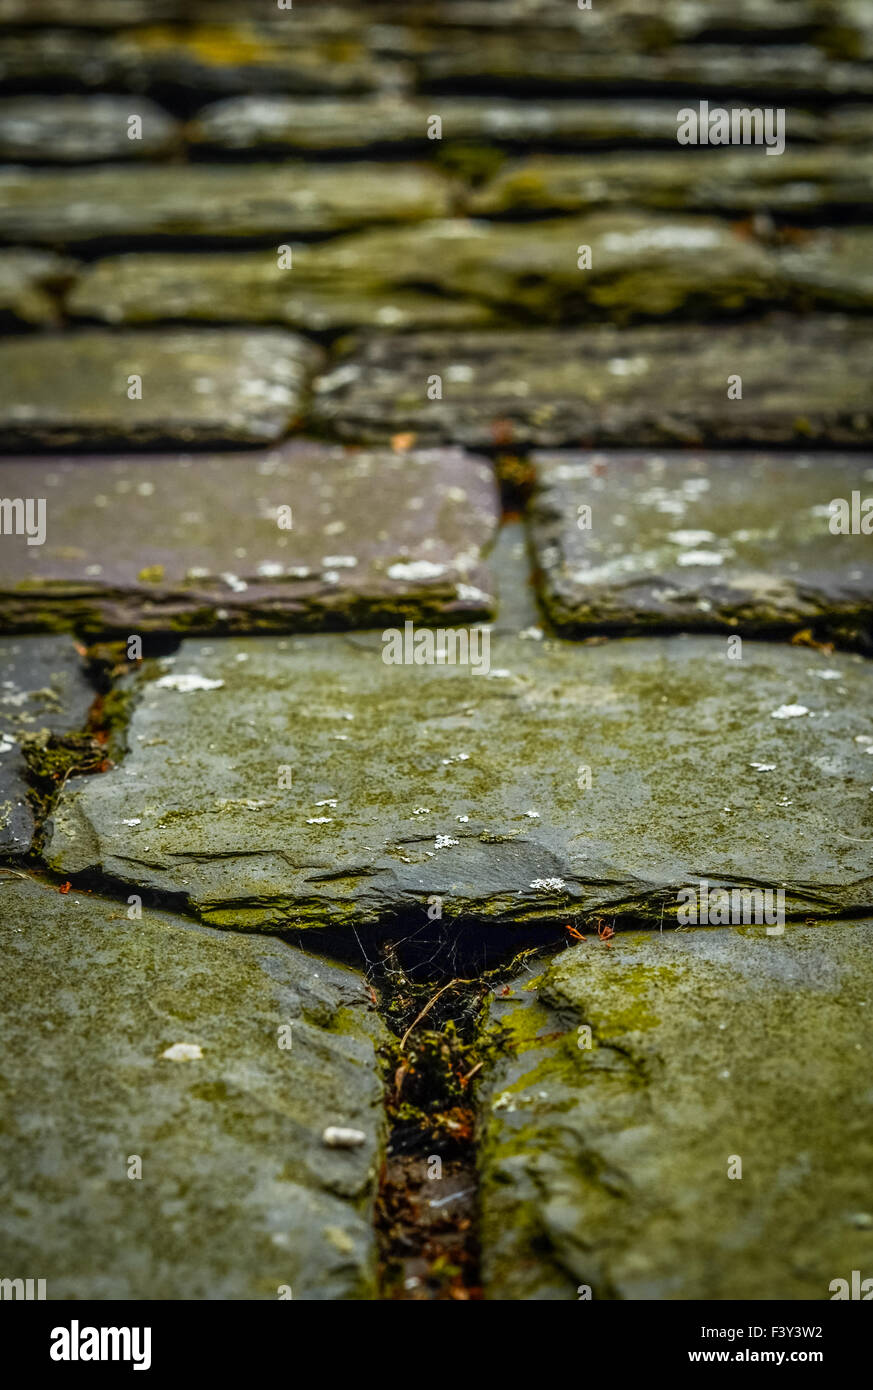 Old Chipped Slate Roof Tiles Stock Photo